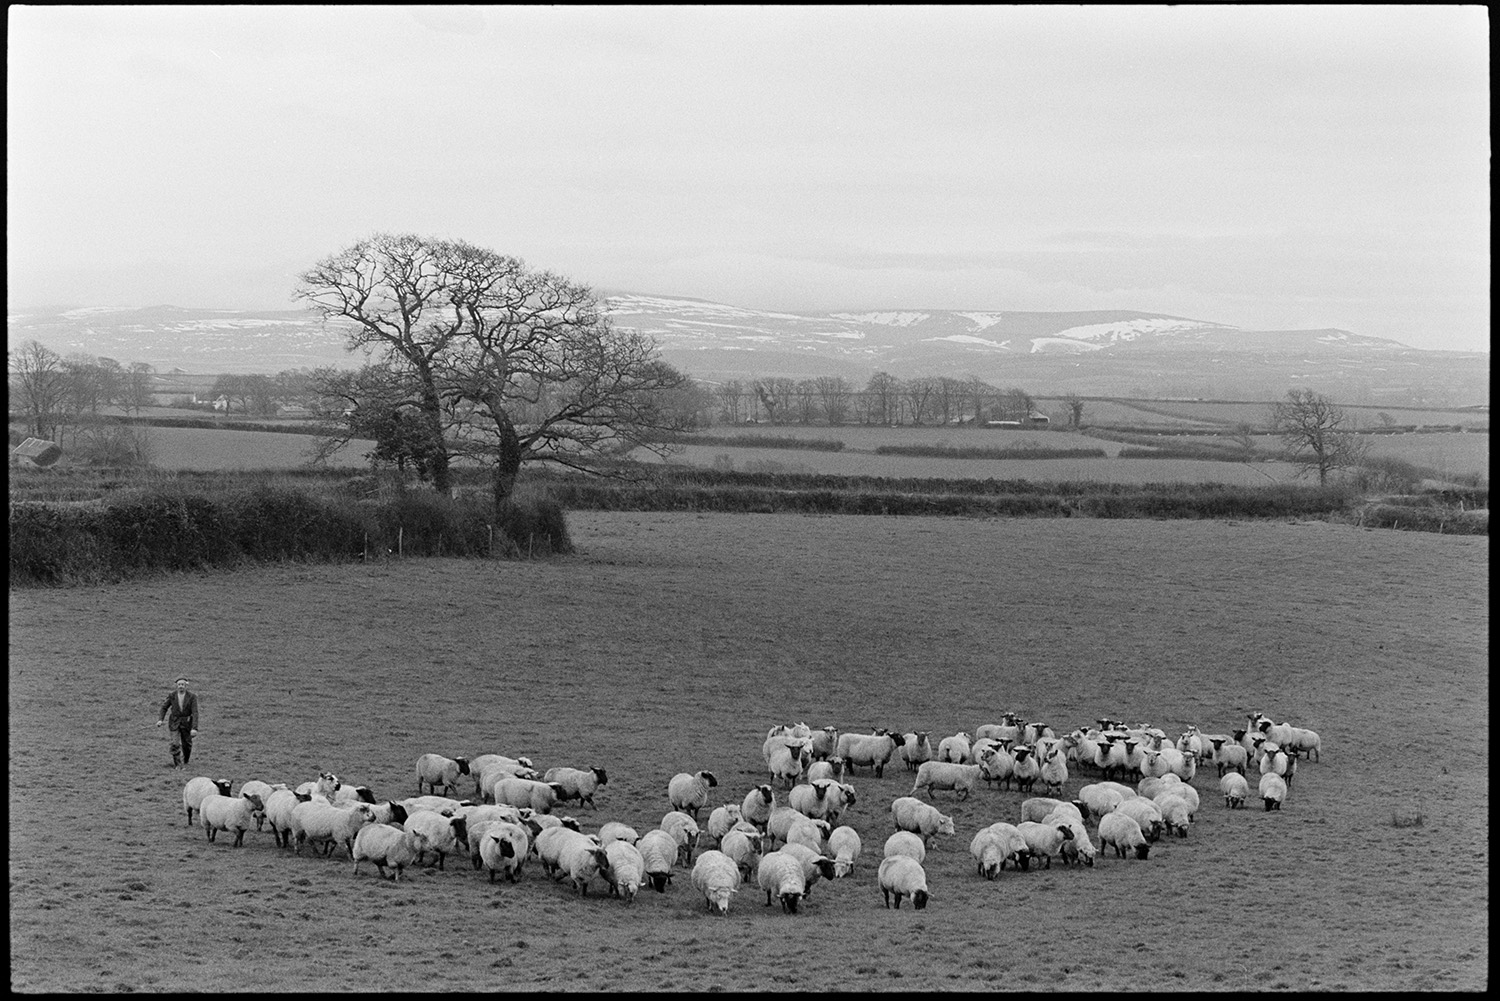 Farmer with flock of sheep, snowy moor in distance, muddy ground.
[A man walking in a field with a flock of sheep at Ingleigh Green.  Fields, trees and snow covered hills are visible in the distance.]